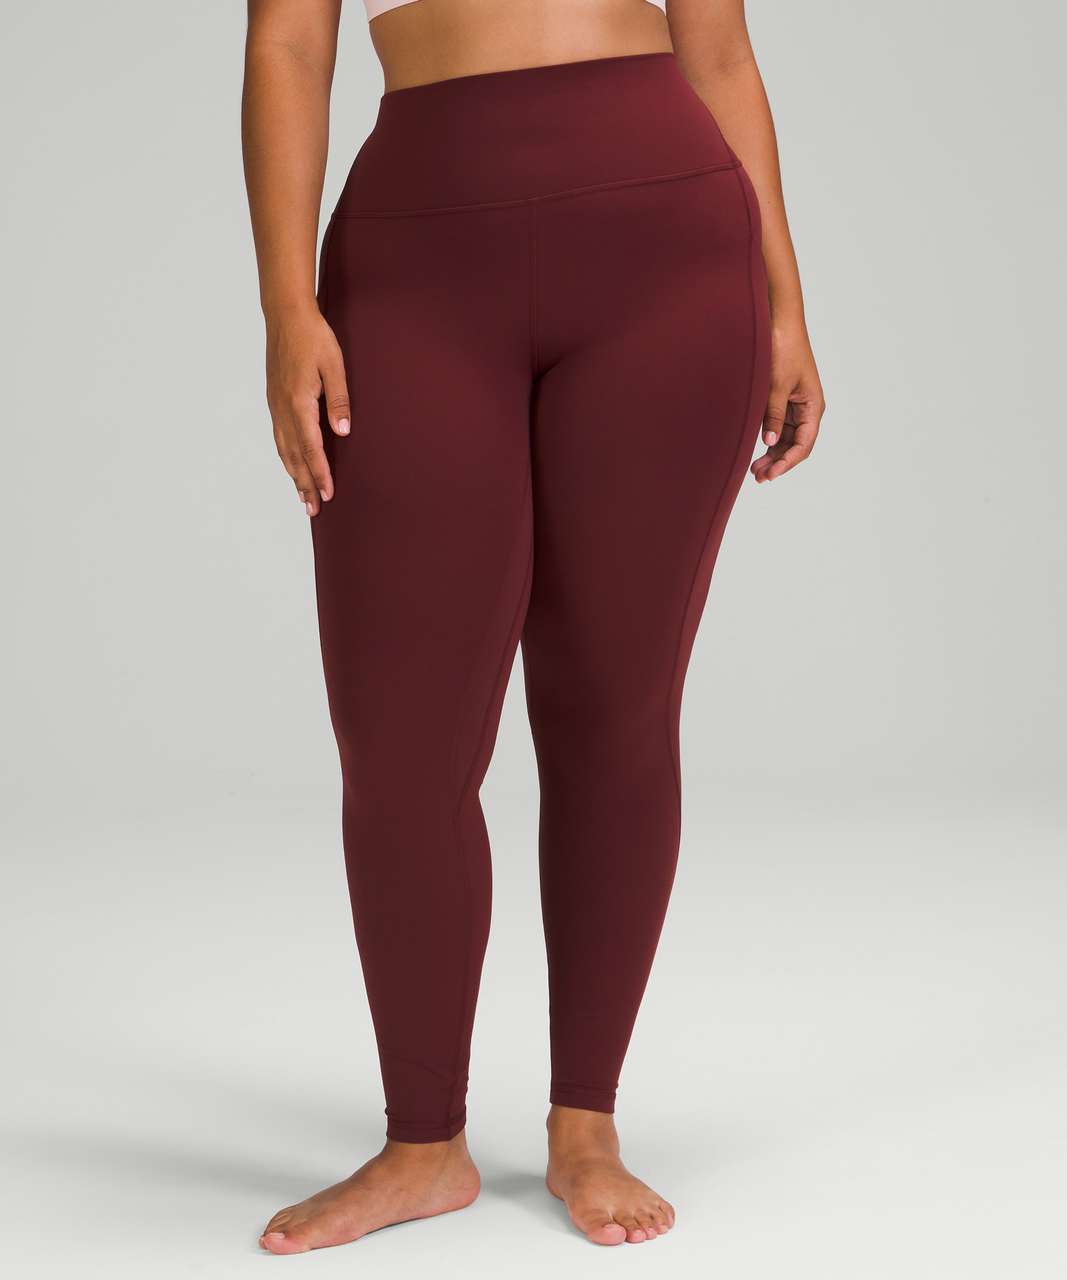 Lululemon Align High-Rise Pant with Pockets 28" - Red Merlot